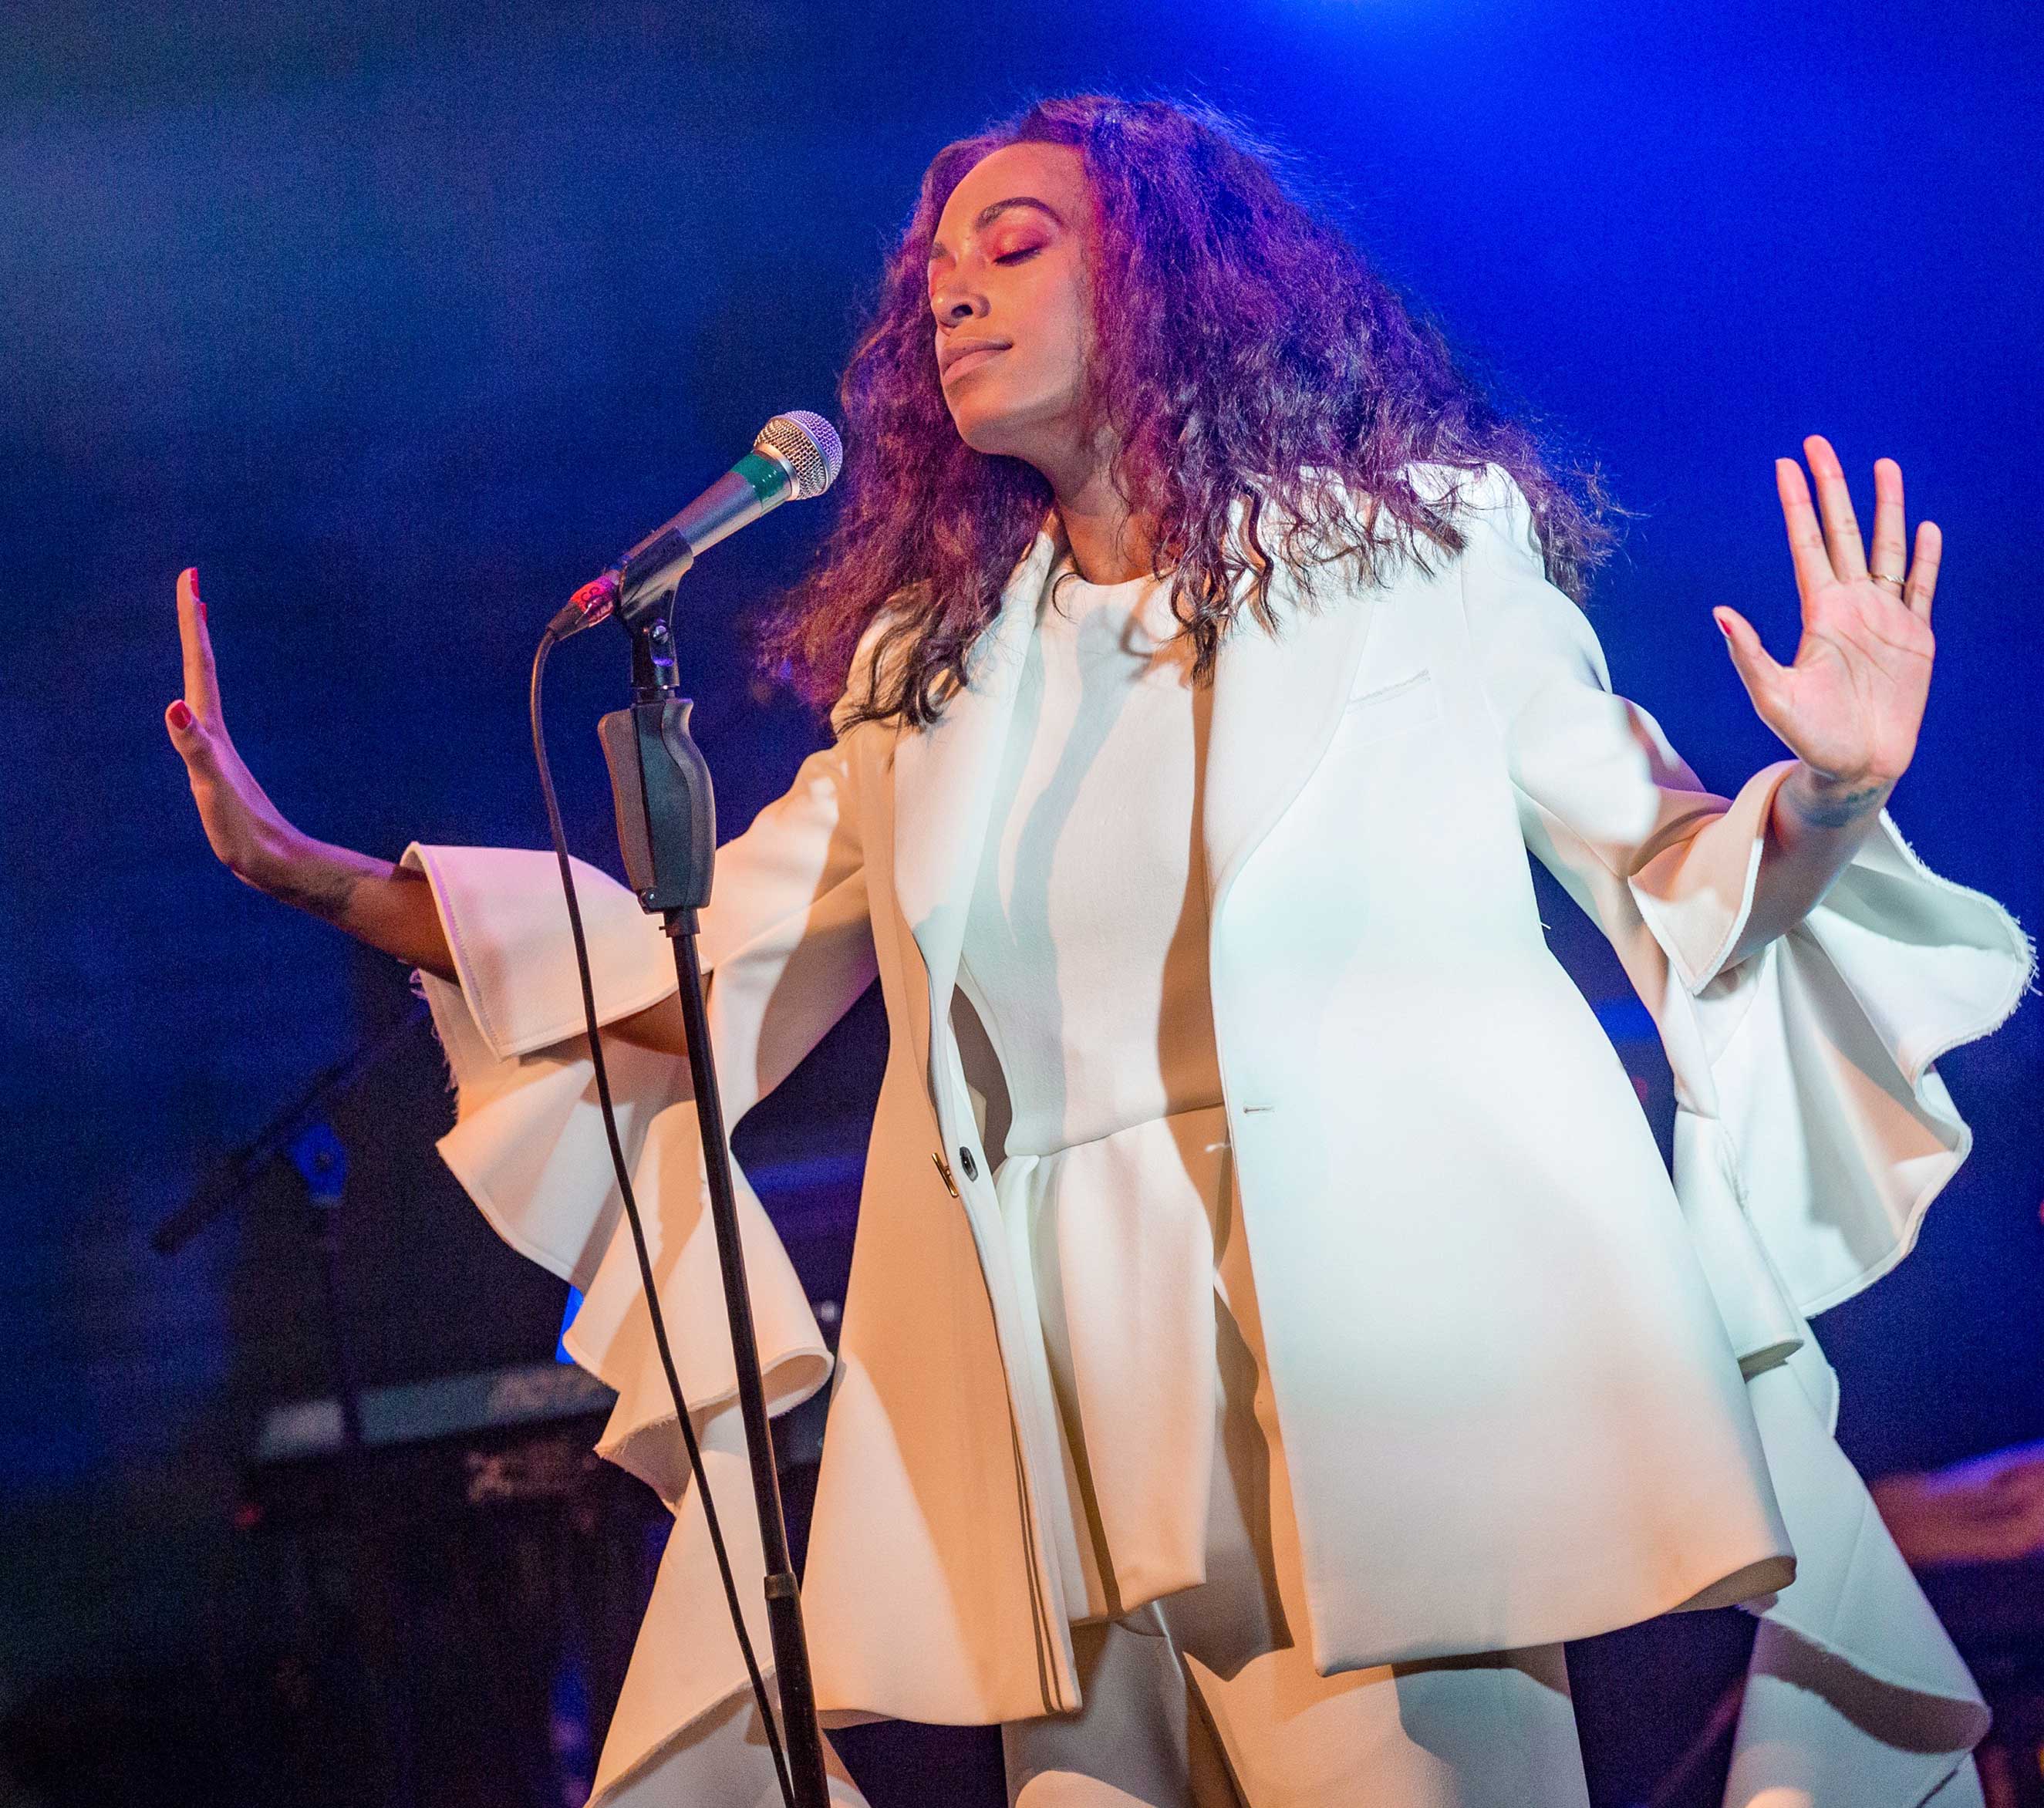 Musician Solange Knowles performs during a benefit concert for the Make it Right Foundation at the House of Blues on August 29, 2015 in New Orleans, Louisiana. (Josh Brasted—Getty Images)